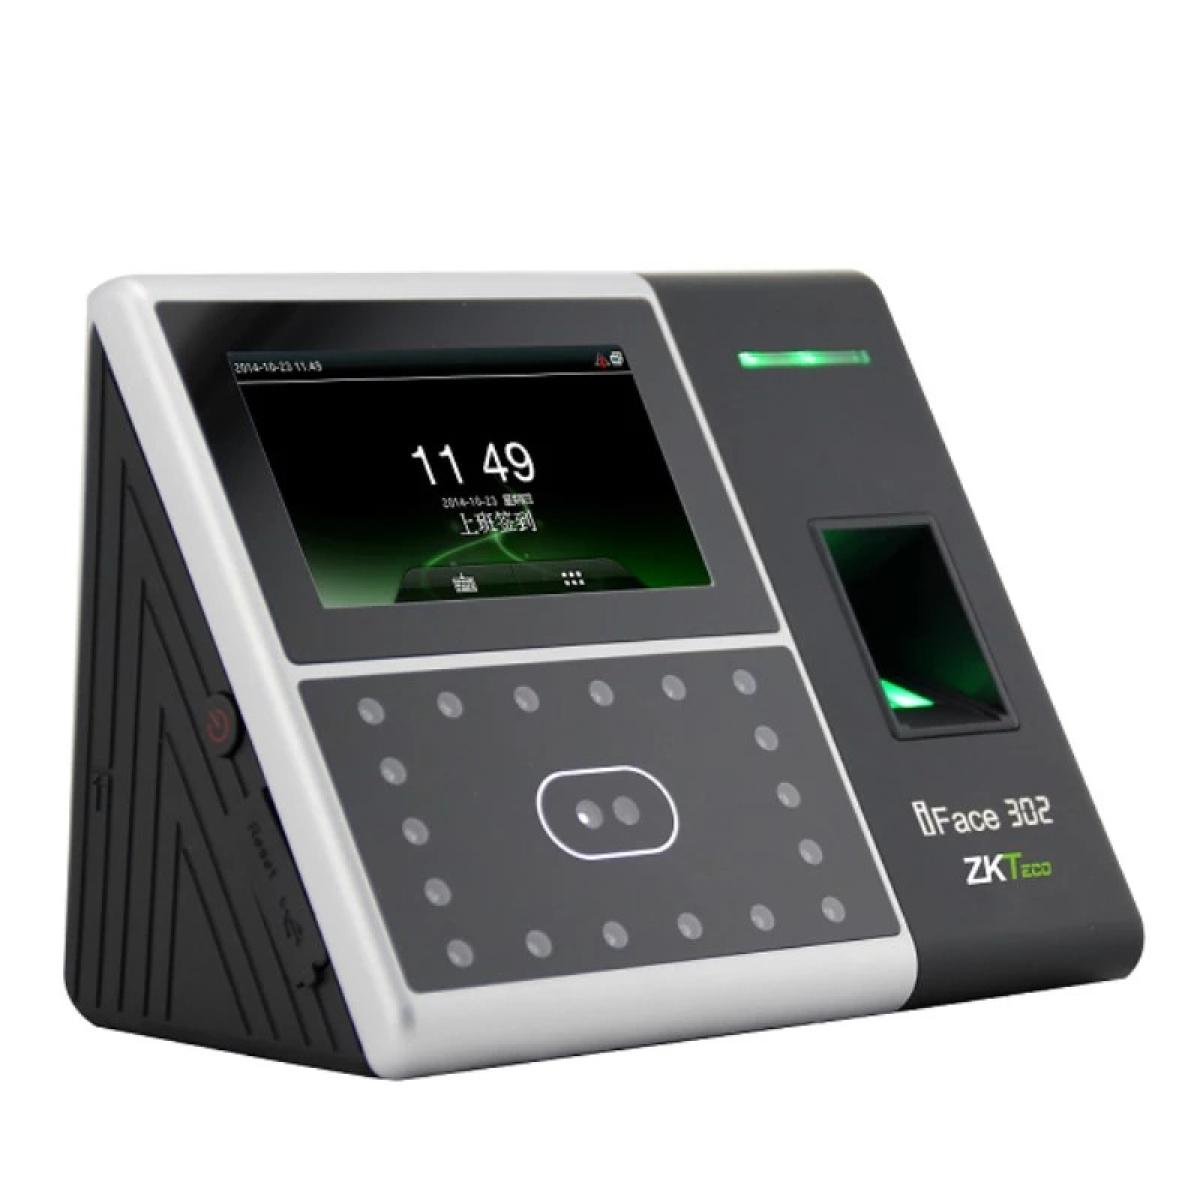 ZKTeco iFace302 Time attendance and Access Control Terminal